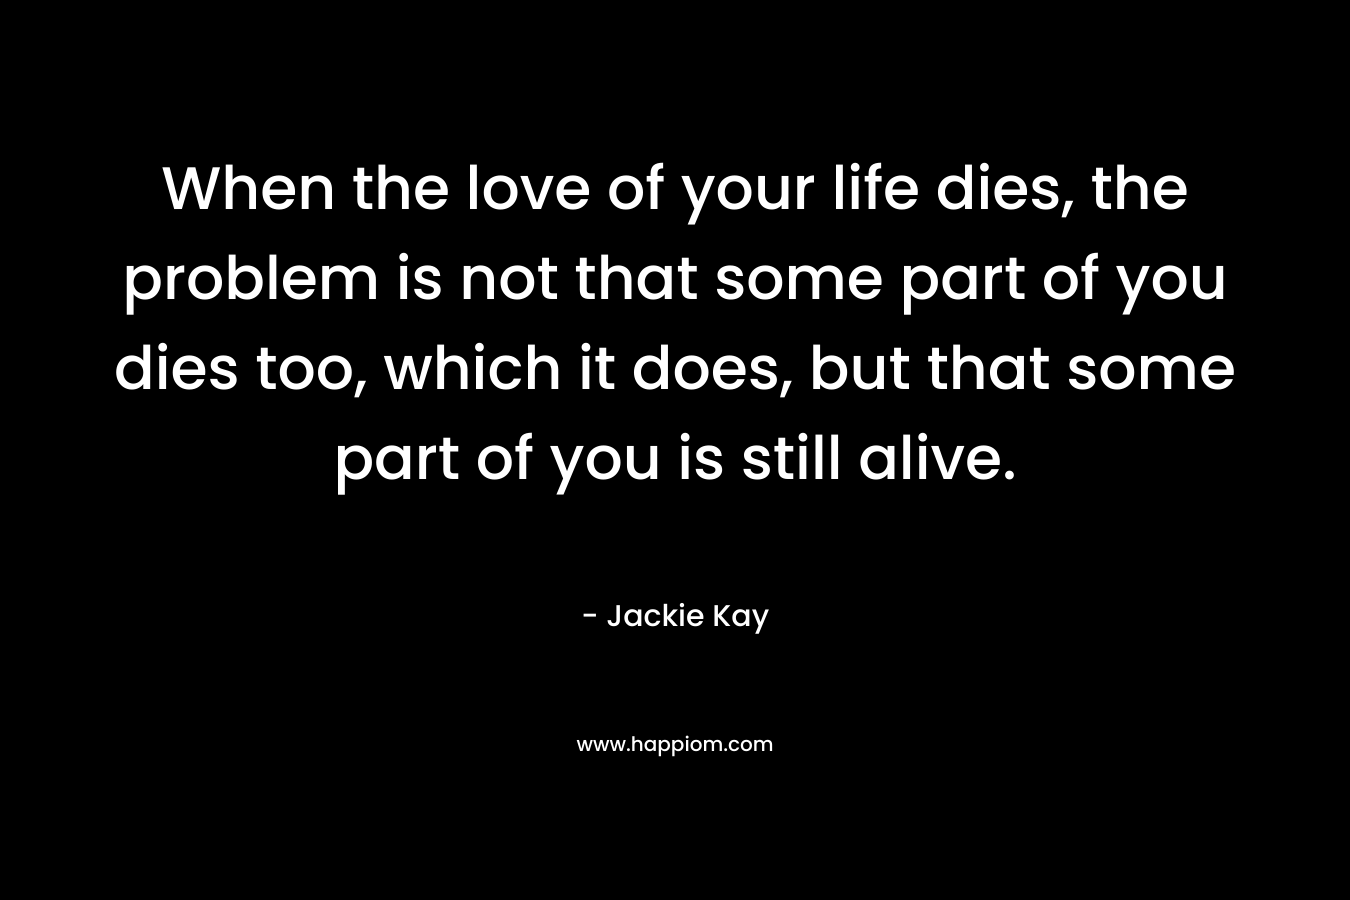 When the love of your life dies, the problem is not that some part of you dies too, which it does, but that some part of you is still alive.